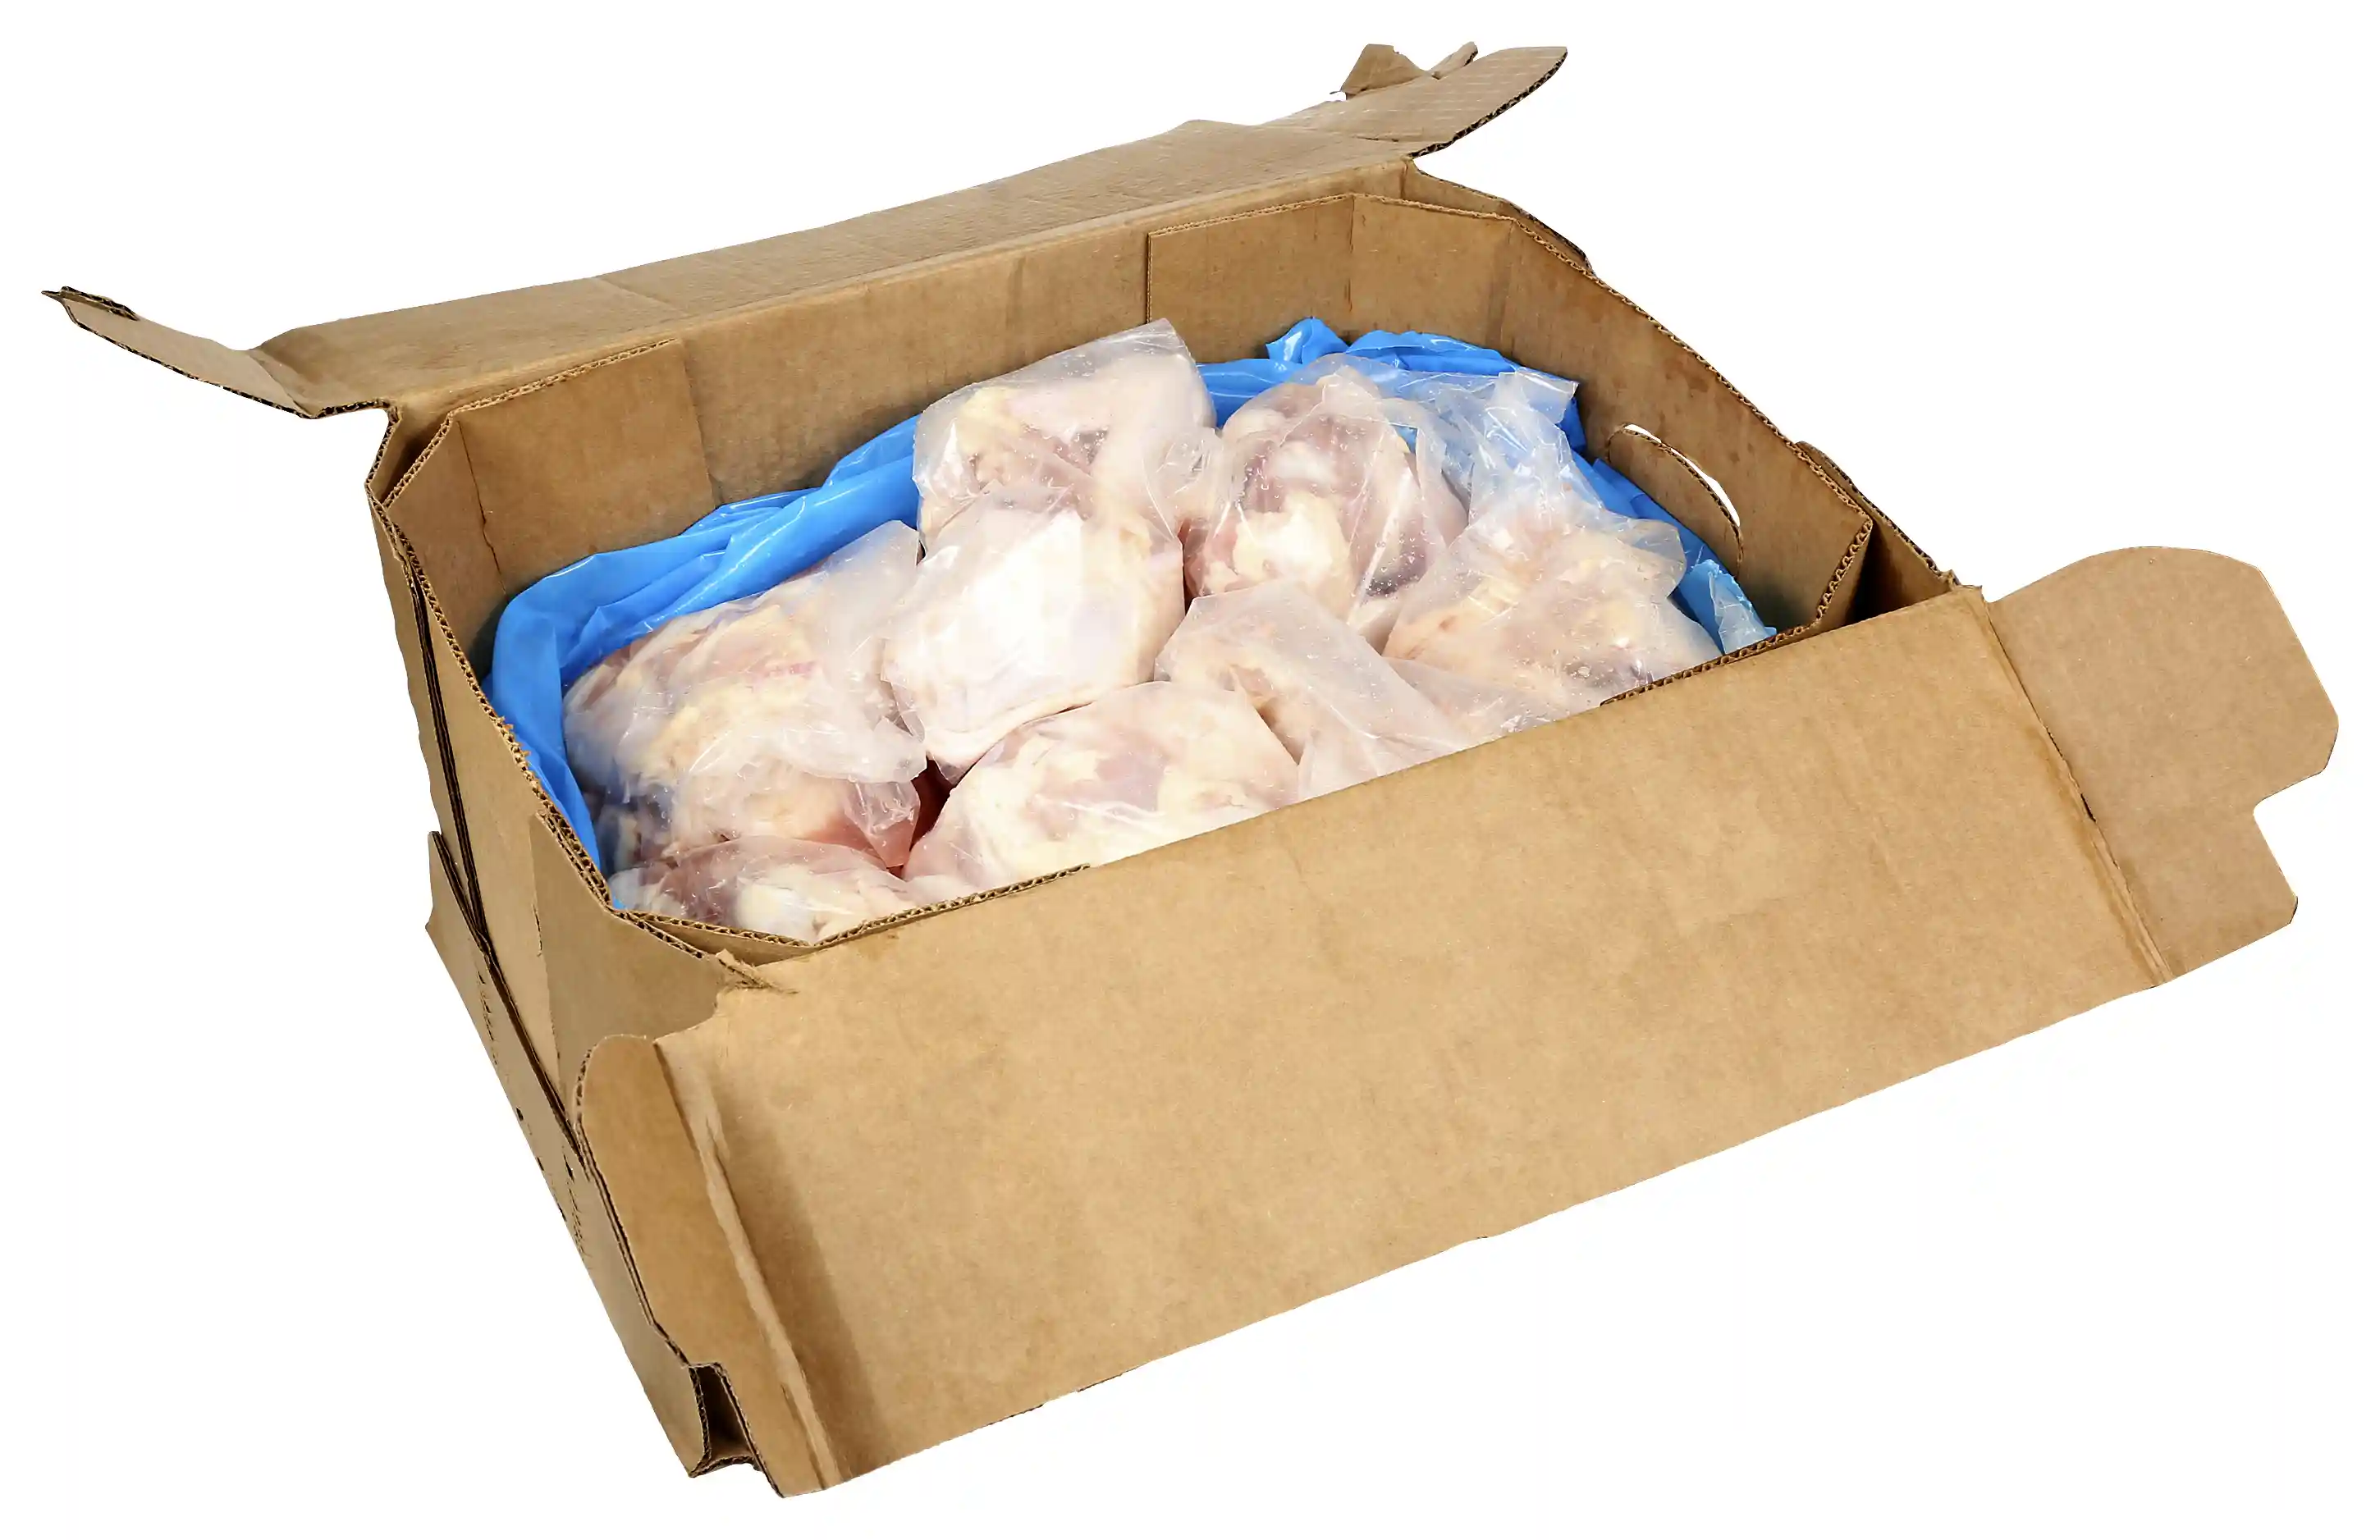 Tyson® 100% All Natural* Uncooked 8 Piece Chicken Cuts_image_31